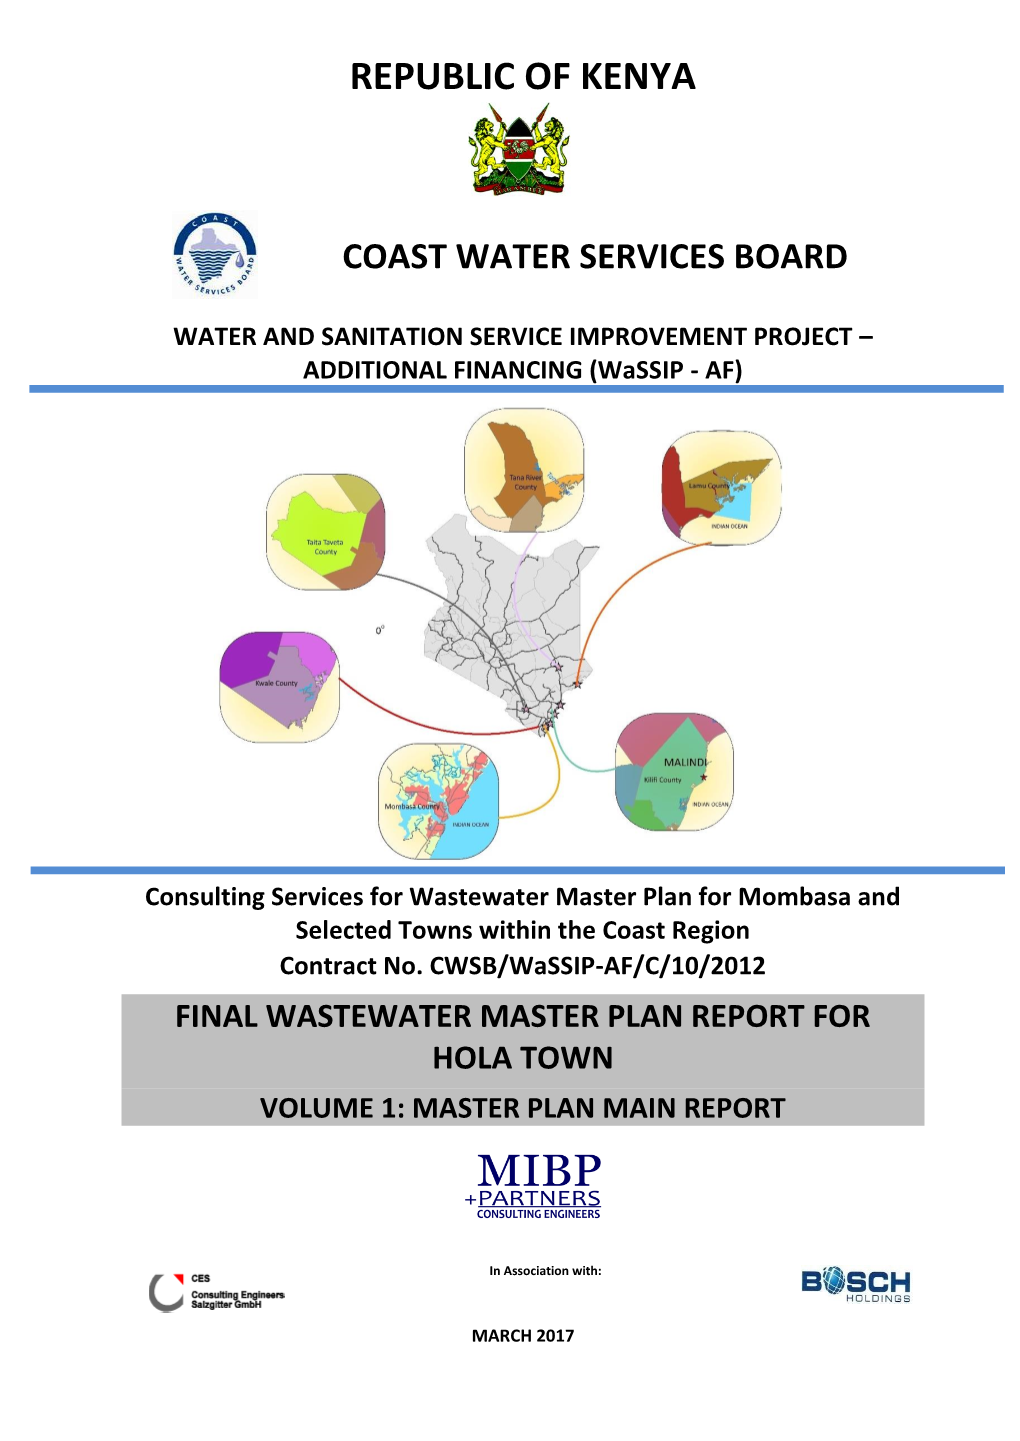 Wastewater Master Plan Report for Hola Town